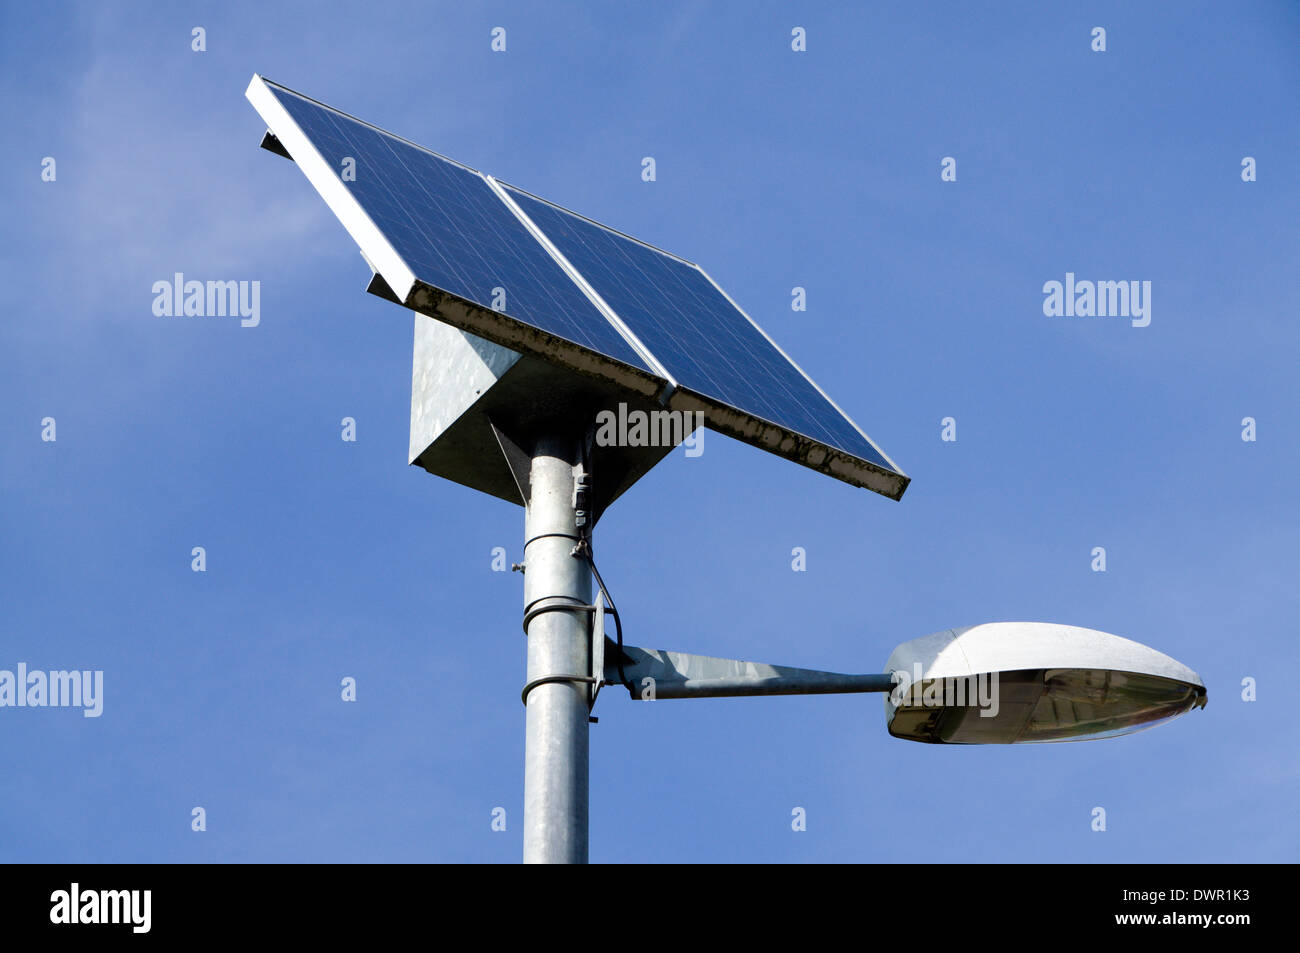 Street Light with solar panel attached, Cardiff, Wales. Stock Photo